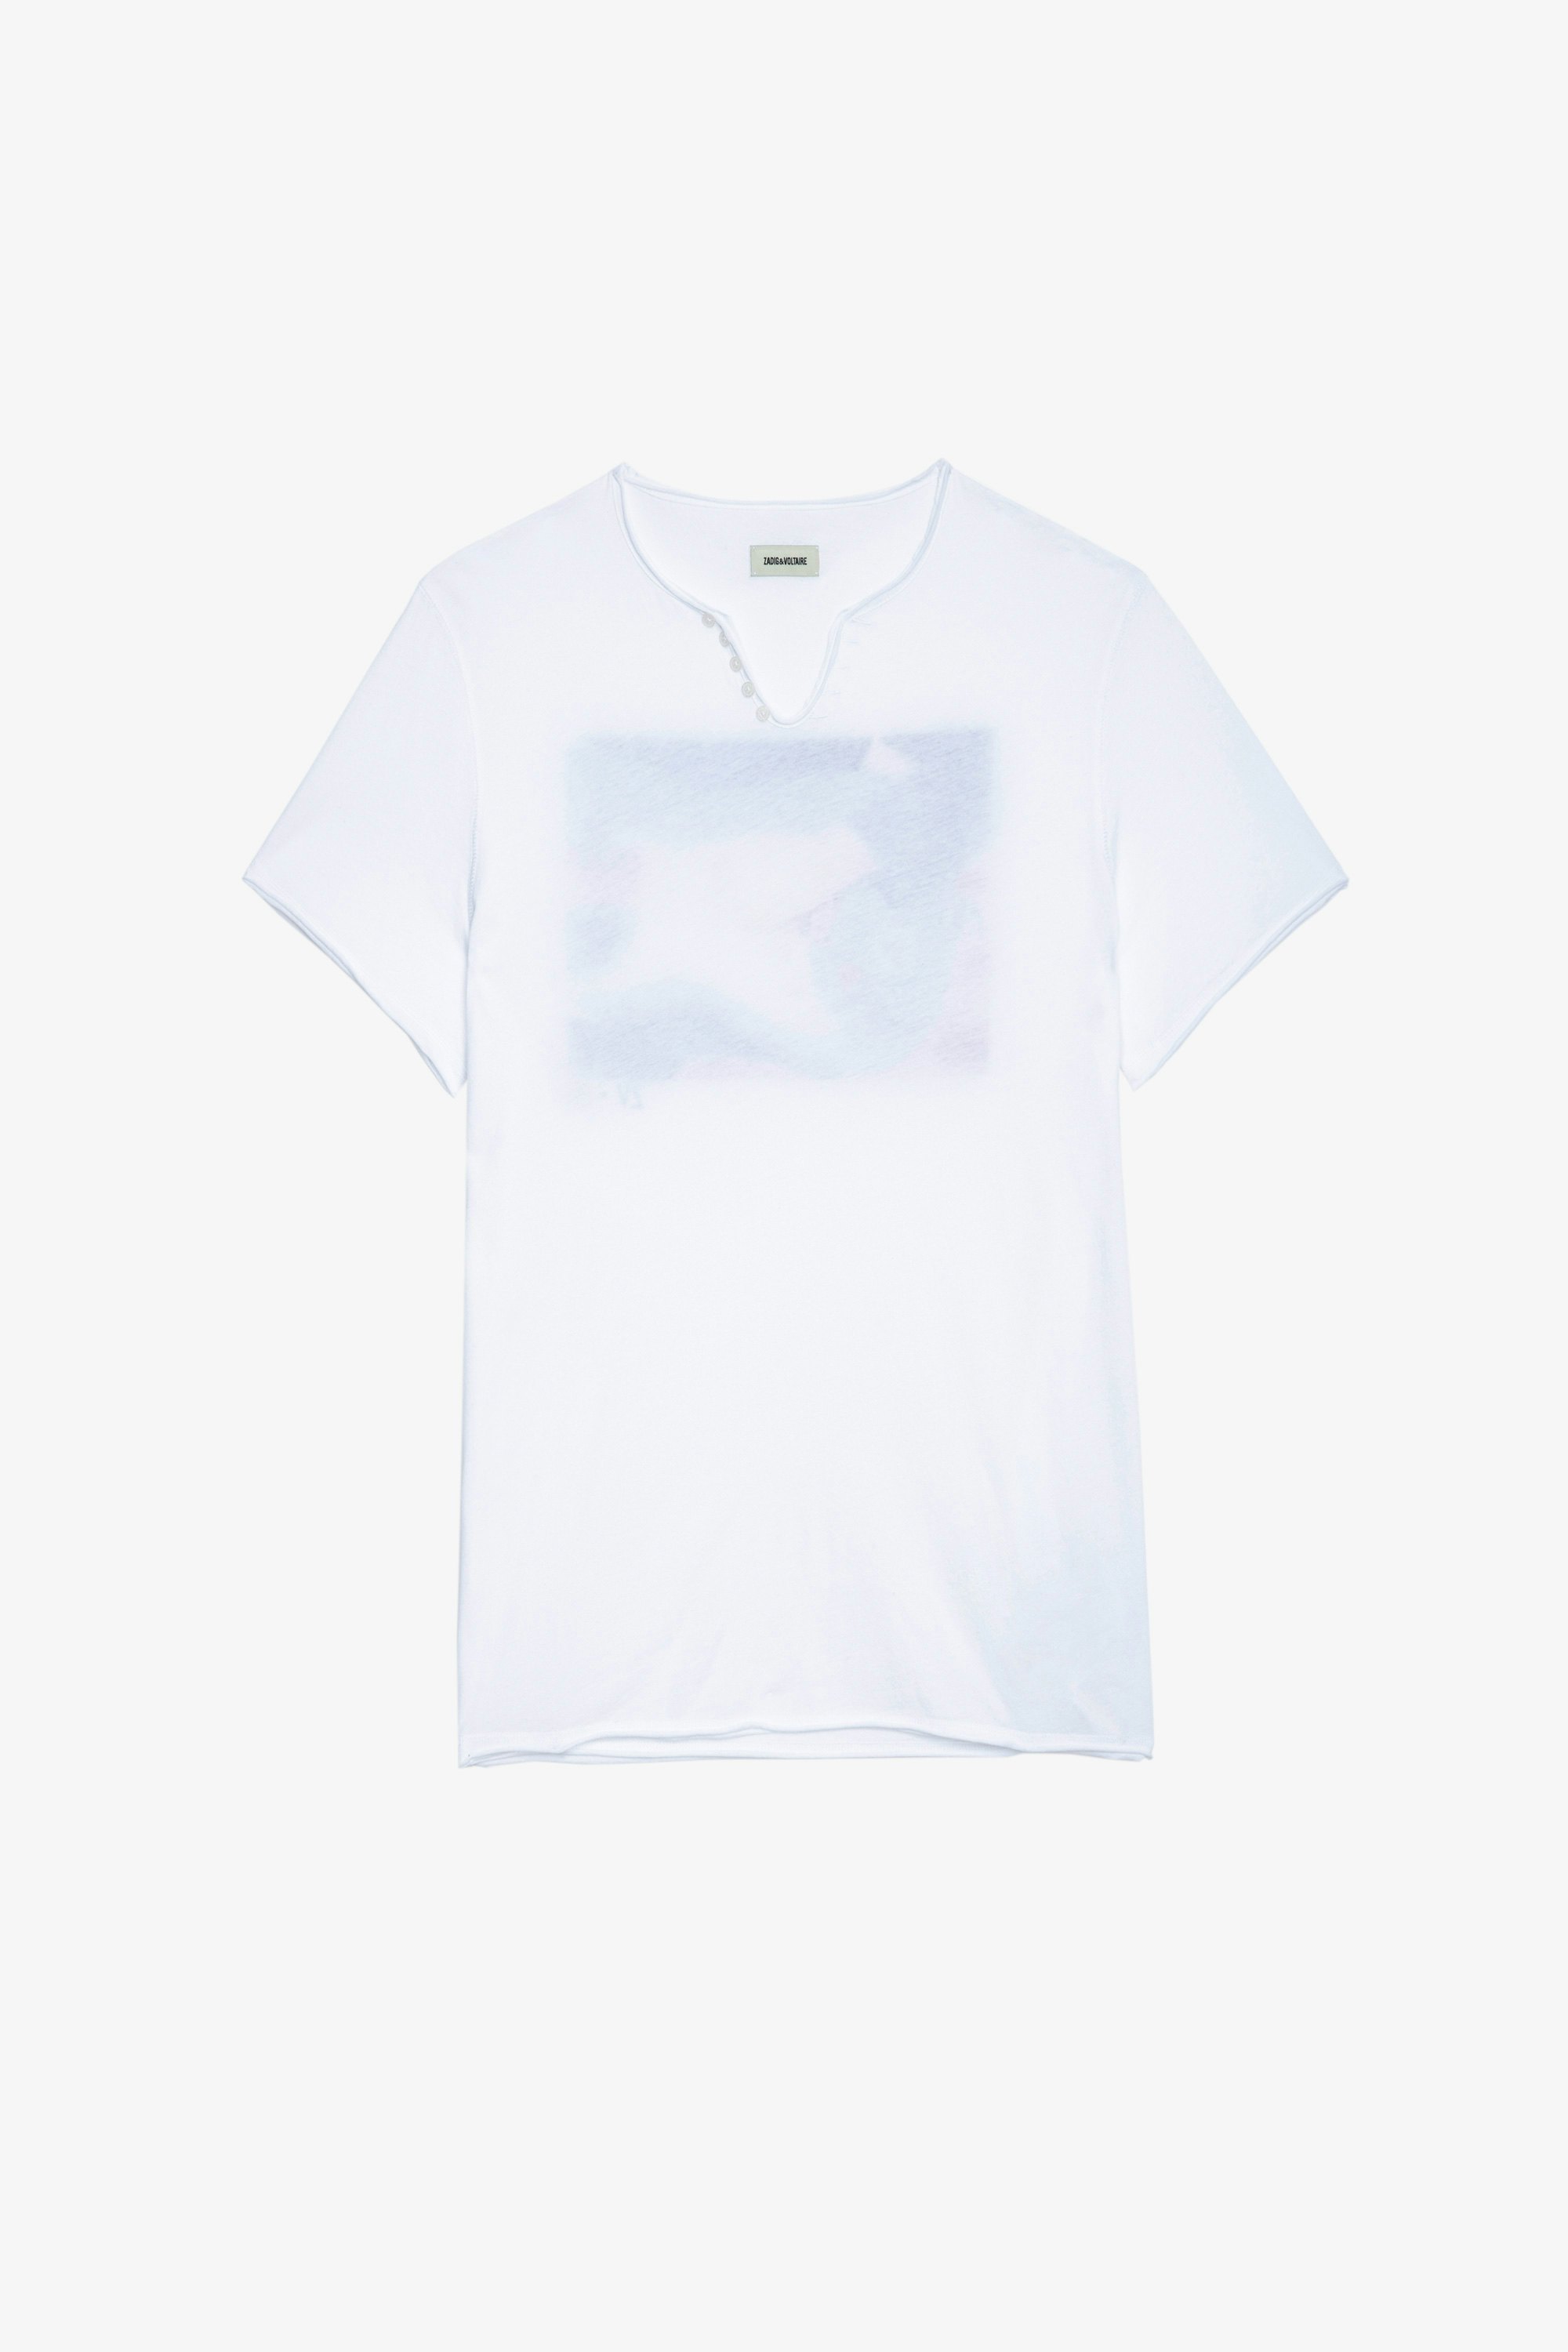 Monastir Ｔシャツ Men's white cotton T-shirt with photoprint on the back